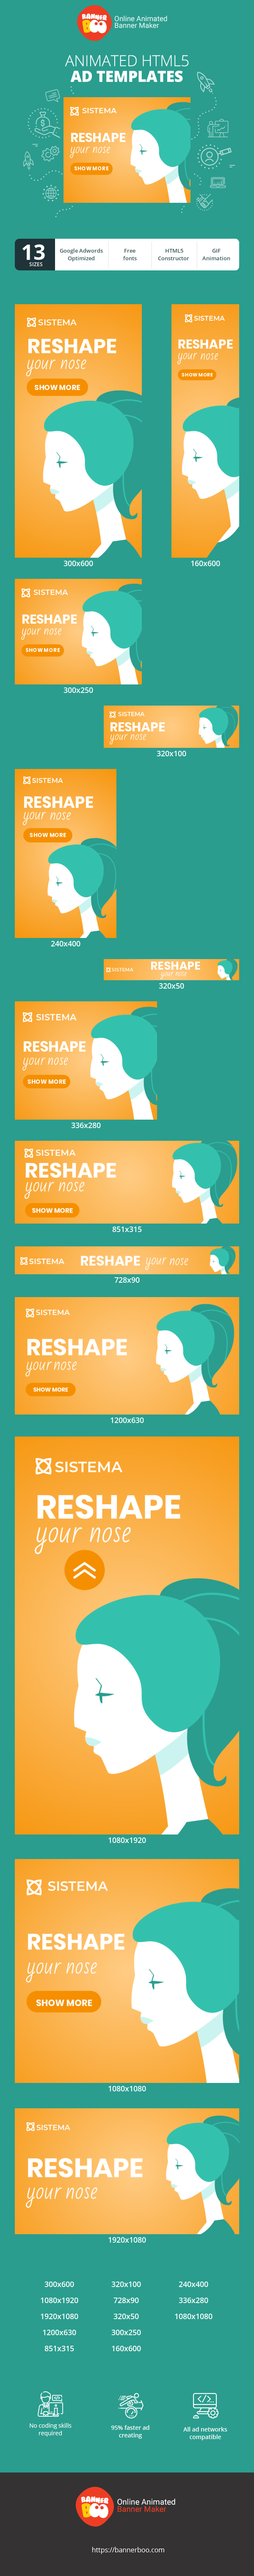 Banner ad template — Reshape Your Nose — Plastic Surgeon